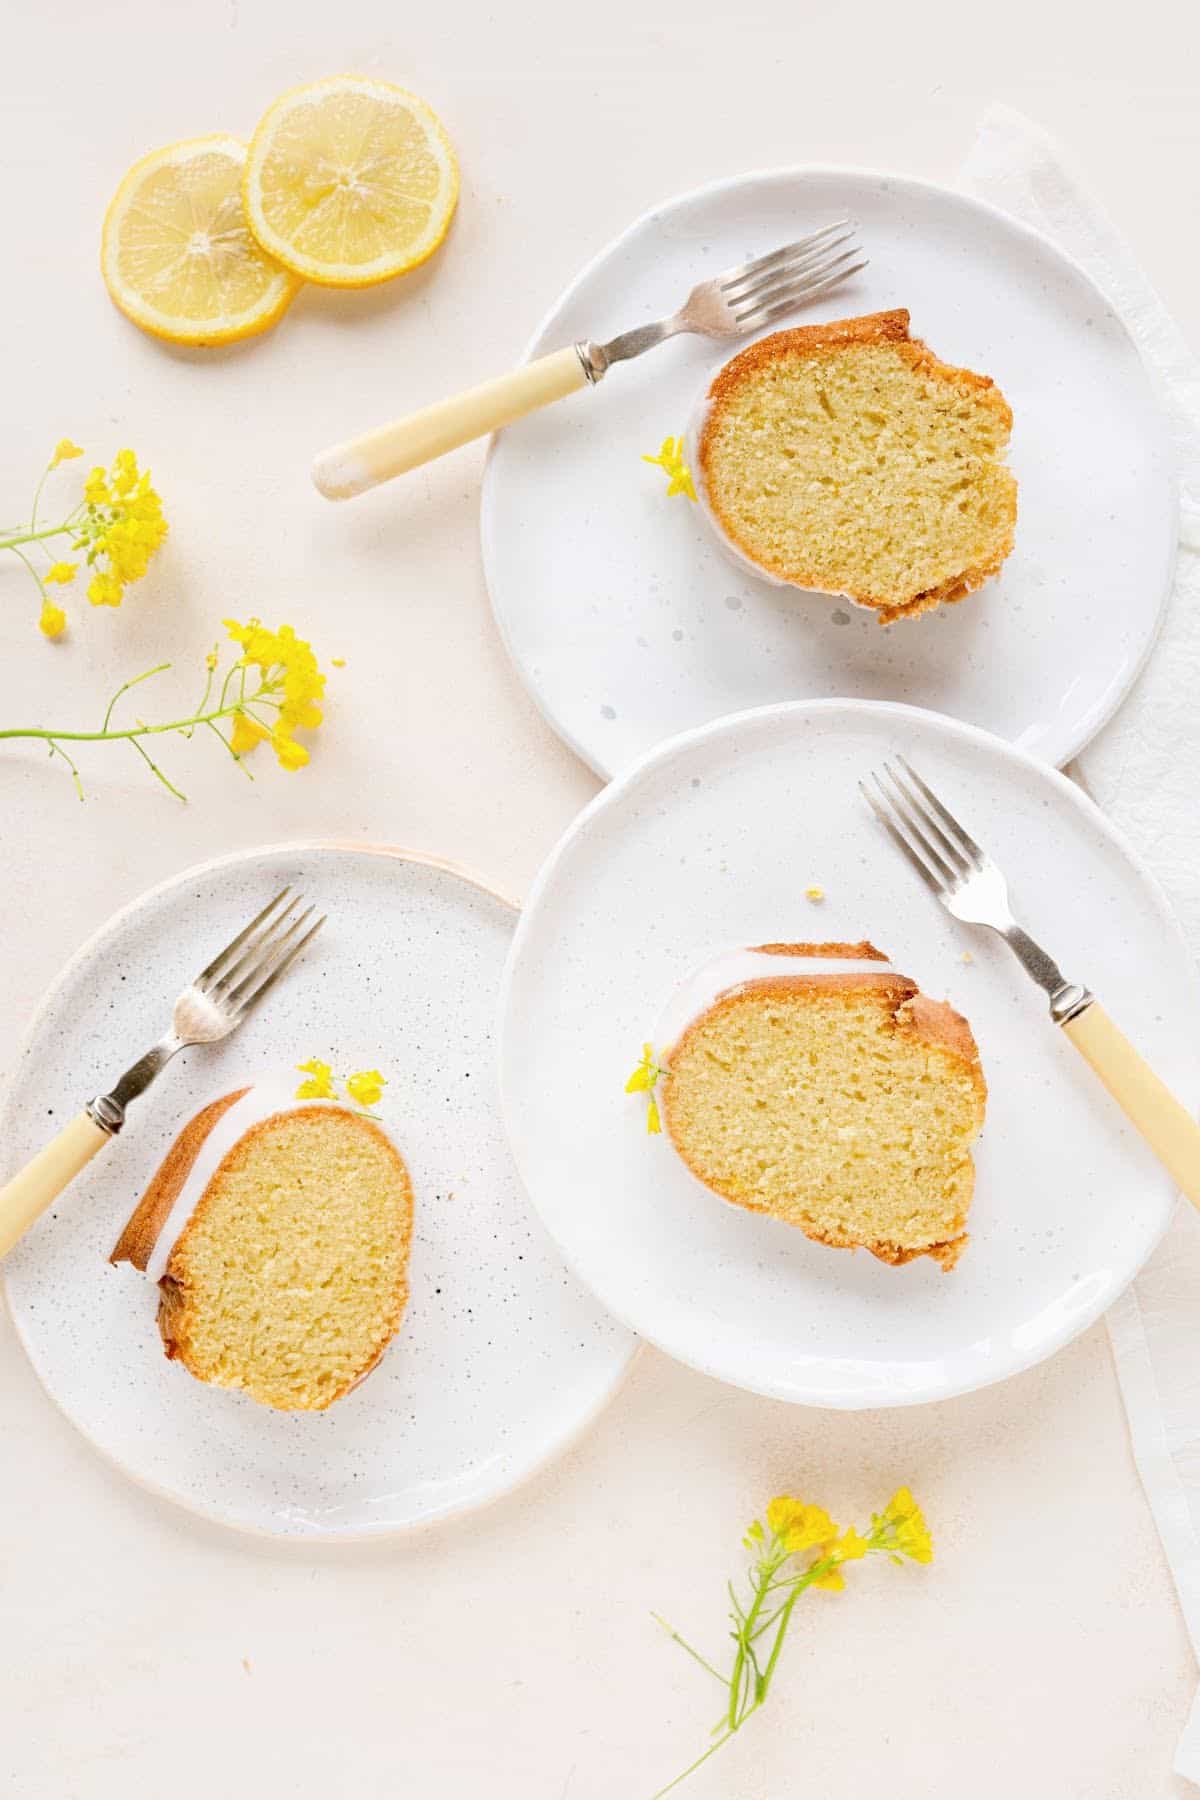 Three white plates with slices of lemon cake, forks, peach colored surface, yellow flowers and lemon slices. Top view.